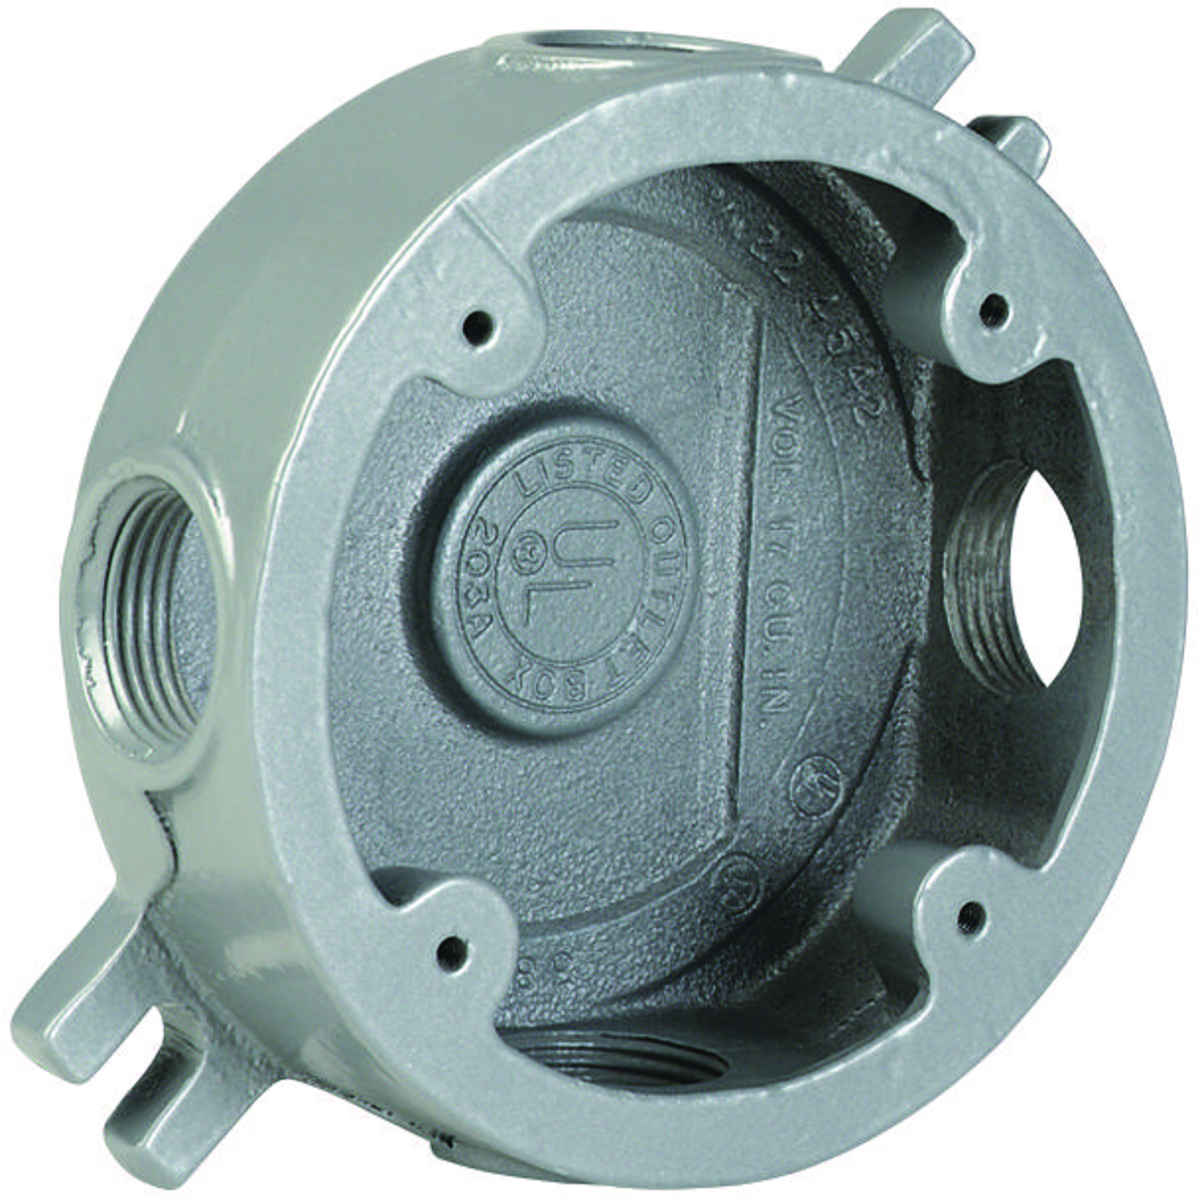 ROUND OUTLET 1-5/8" 3/4" HUB